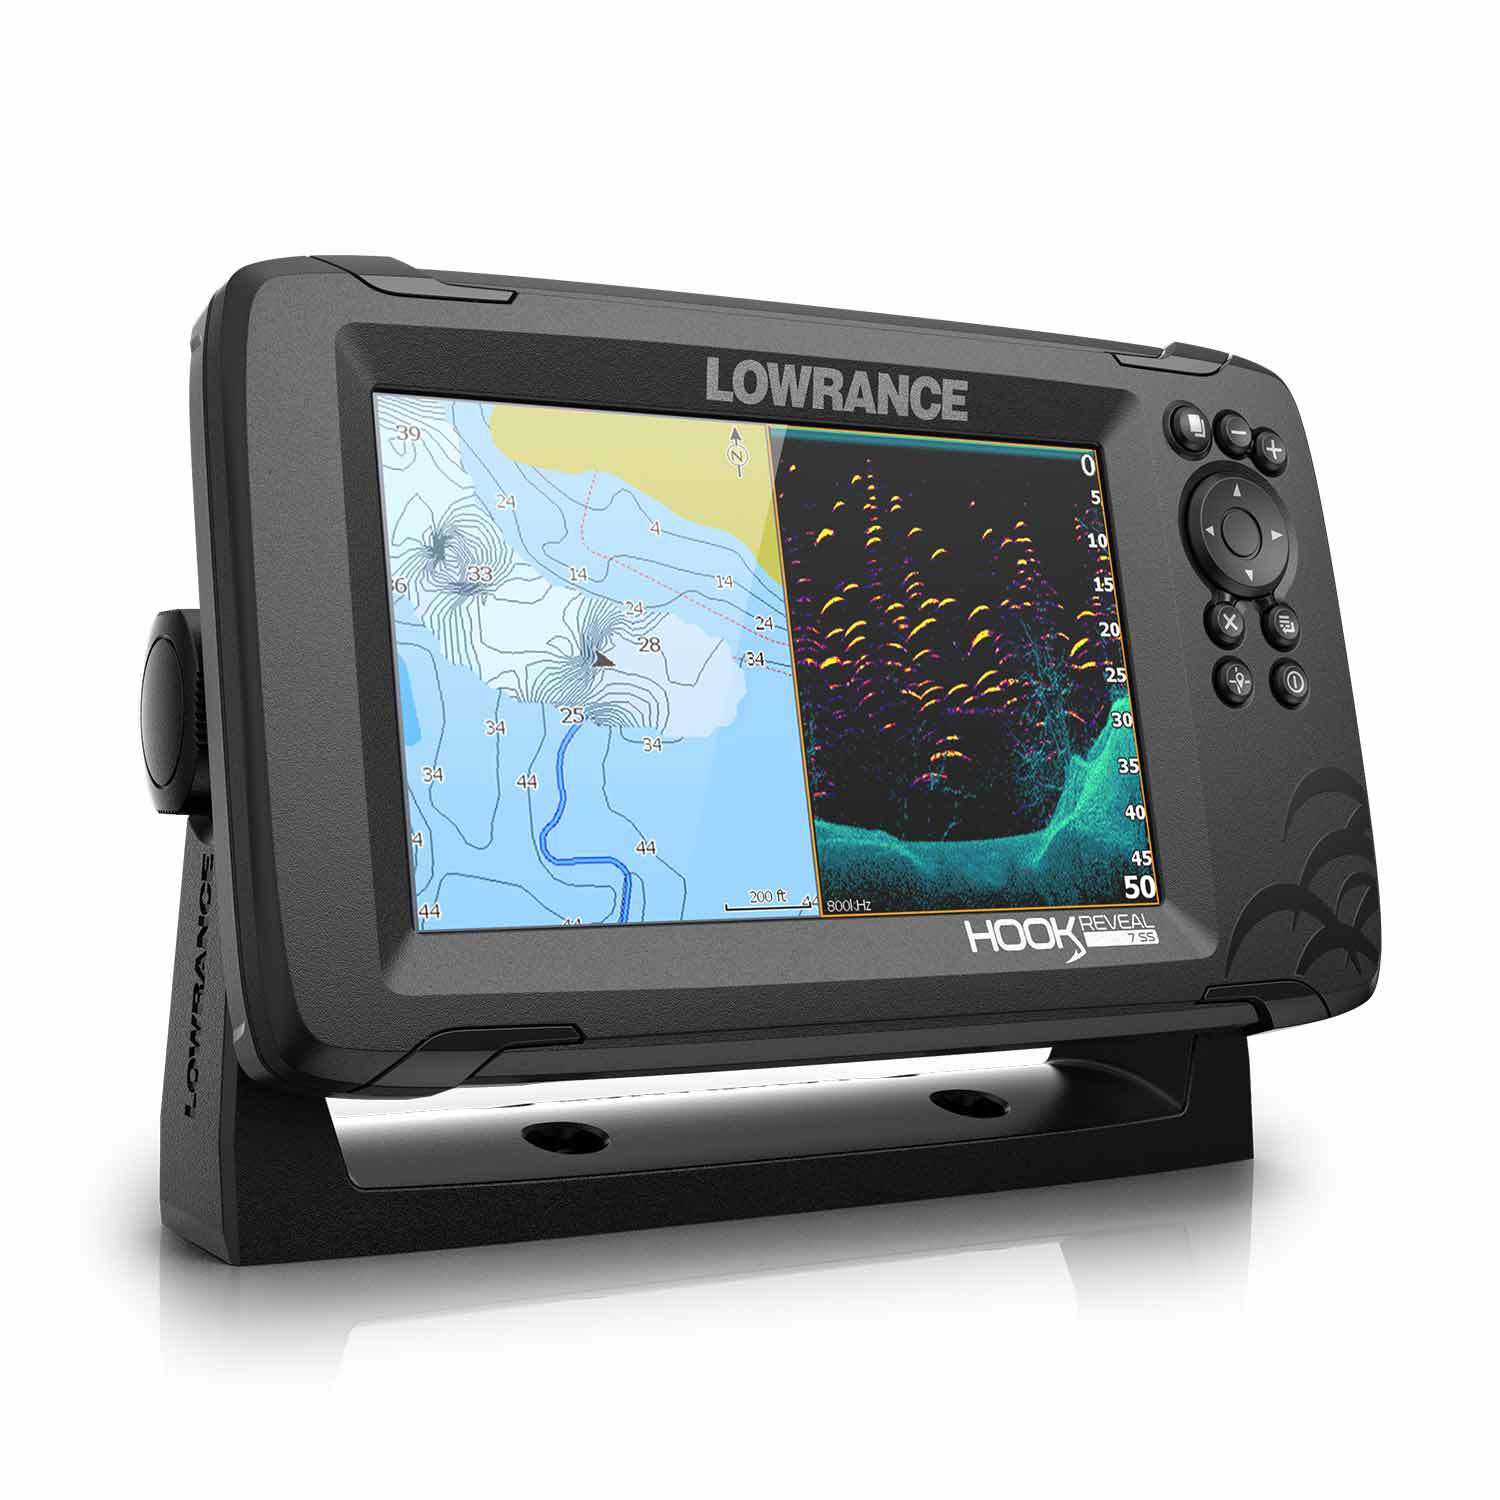 LOWRANCE FISHFINDER COLOR SCREEN AND KEYPAD 